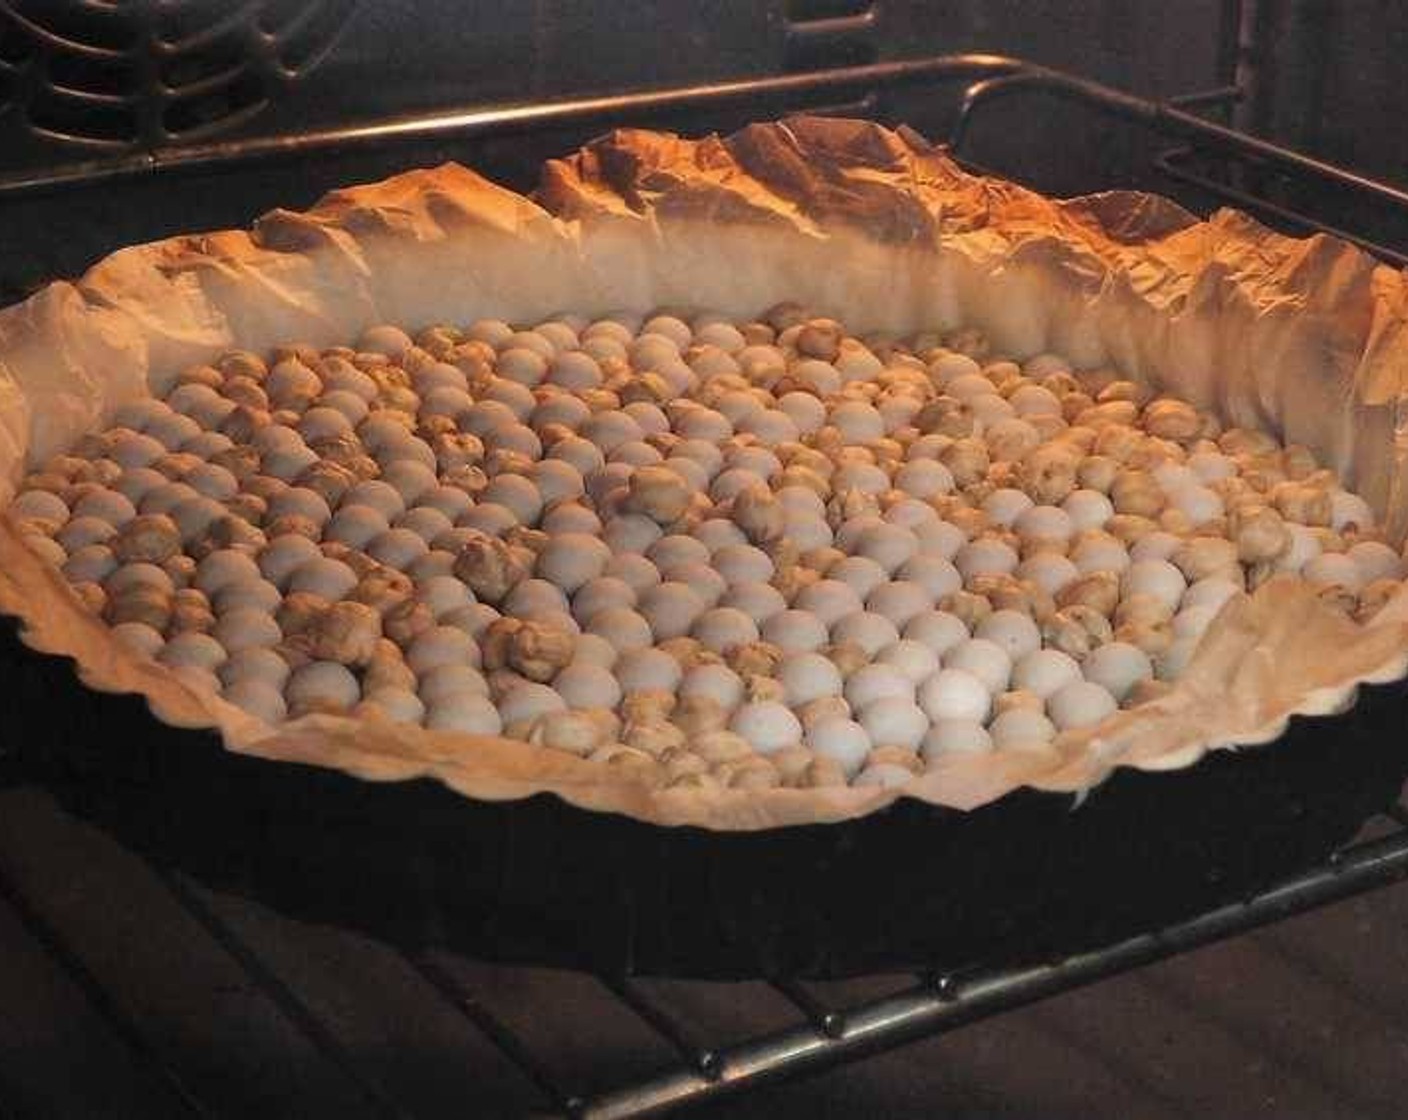 step 3 Next, place baking paper over the pastry and fill the pie with baking weights. Place into the oven and bake for 15 minutes.